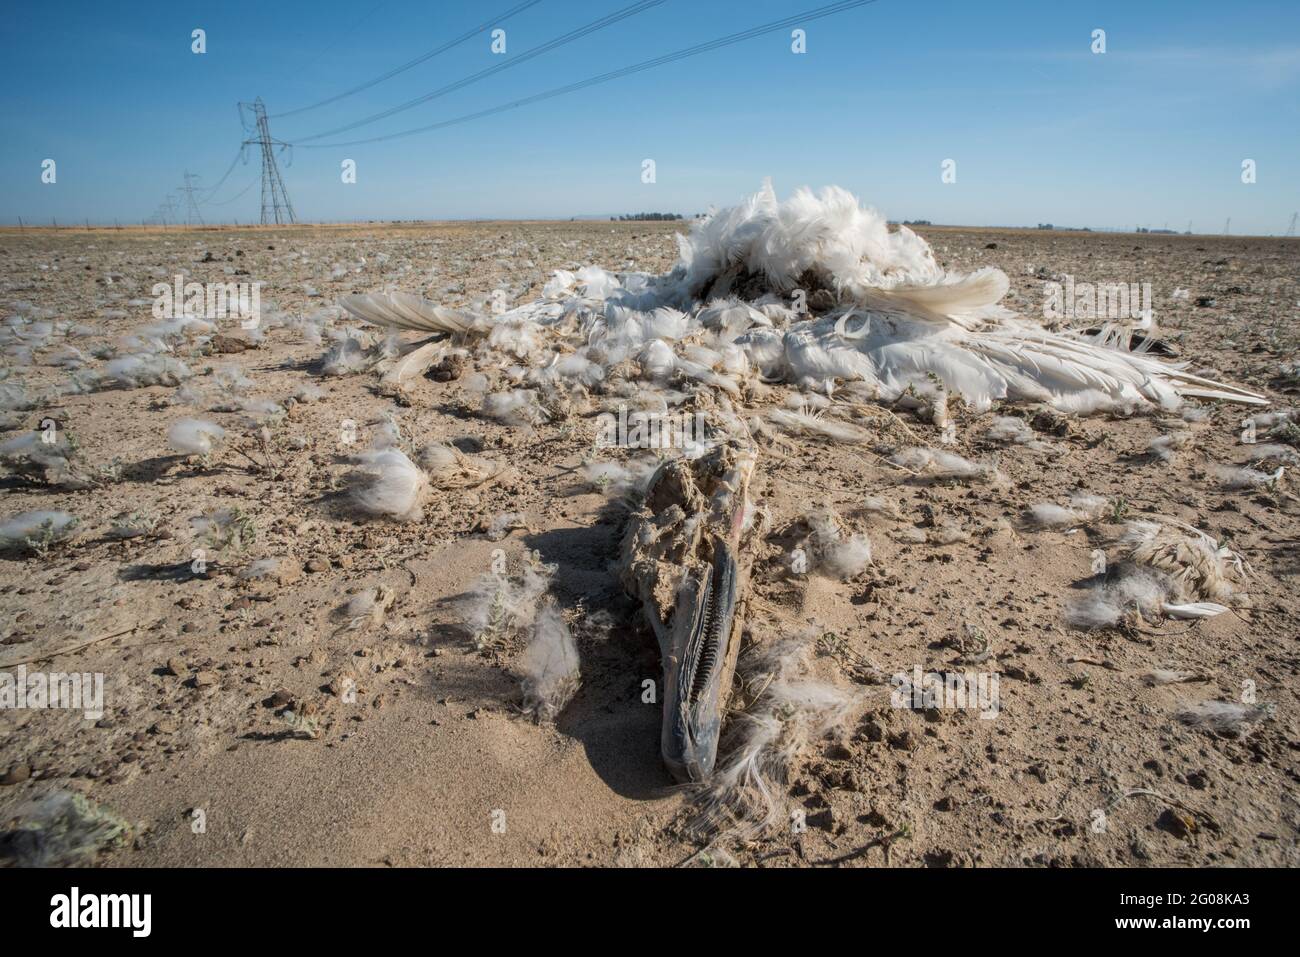 A dead tundra swan (Cygnus columbianus) in California, one of millions of birds killed as a result of a collision with power lines. Stock Photo